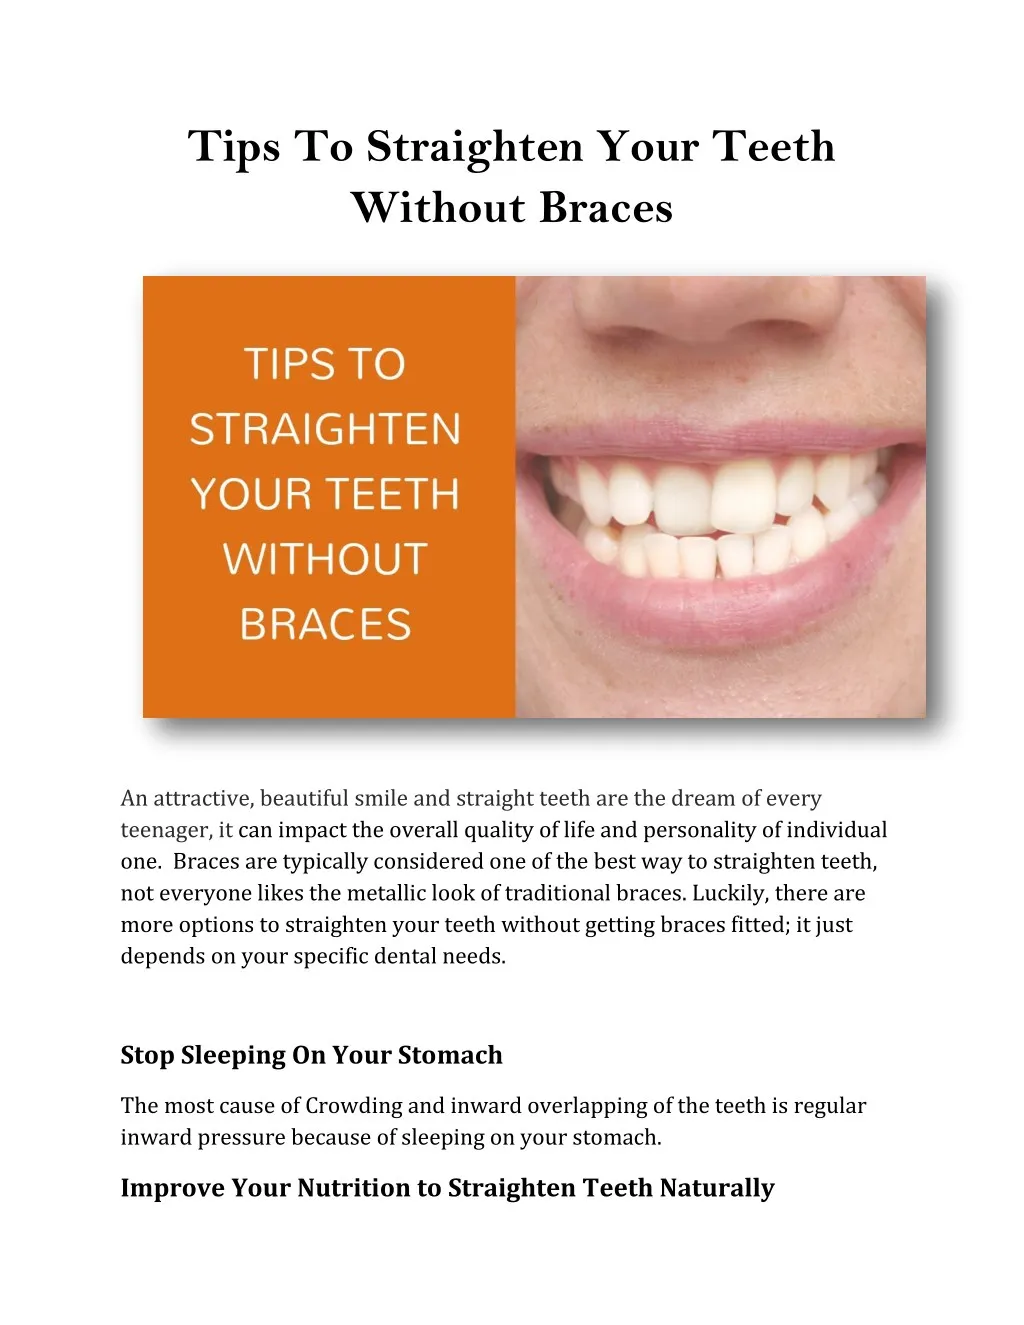 tips to straighten your teeth without braces